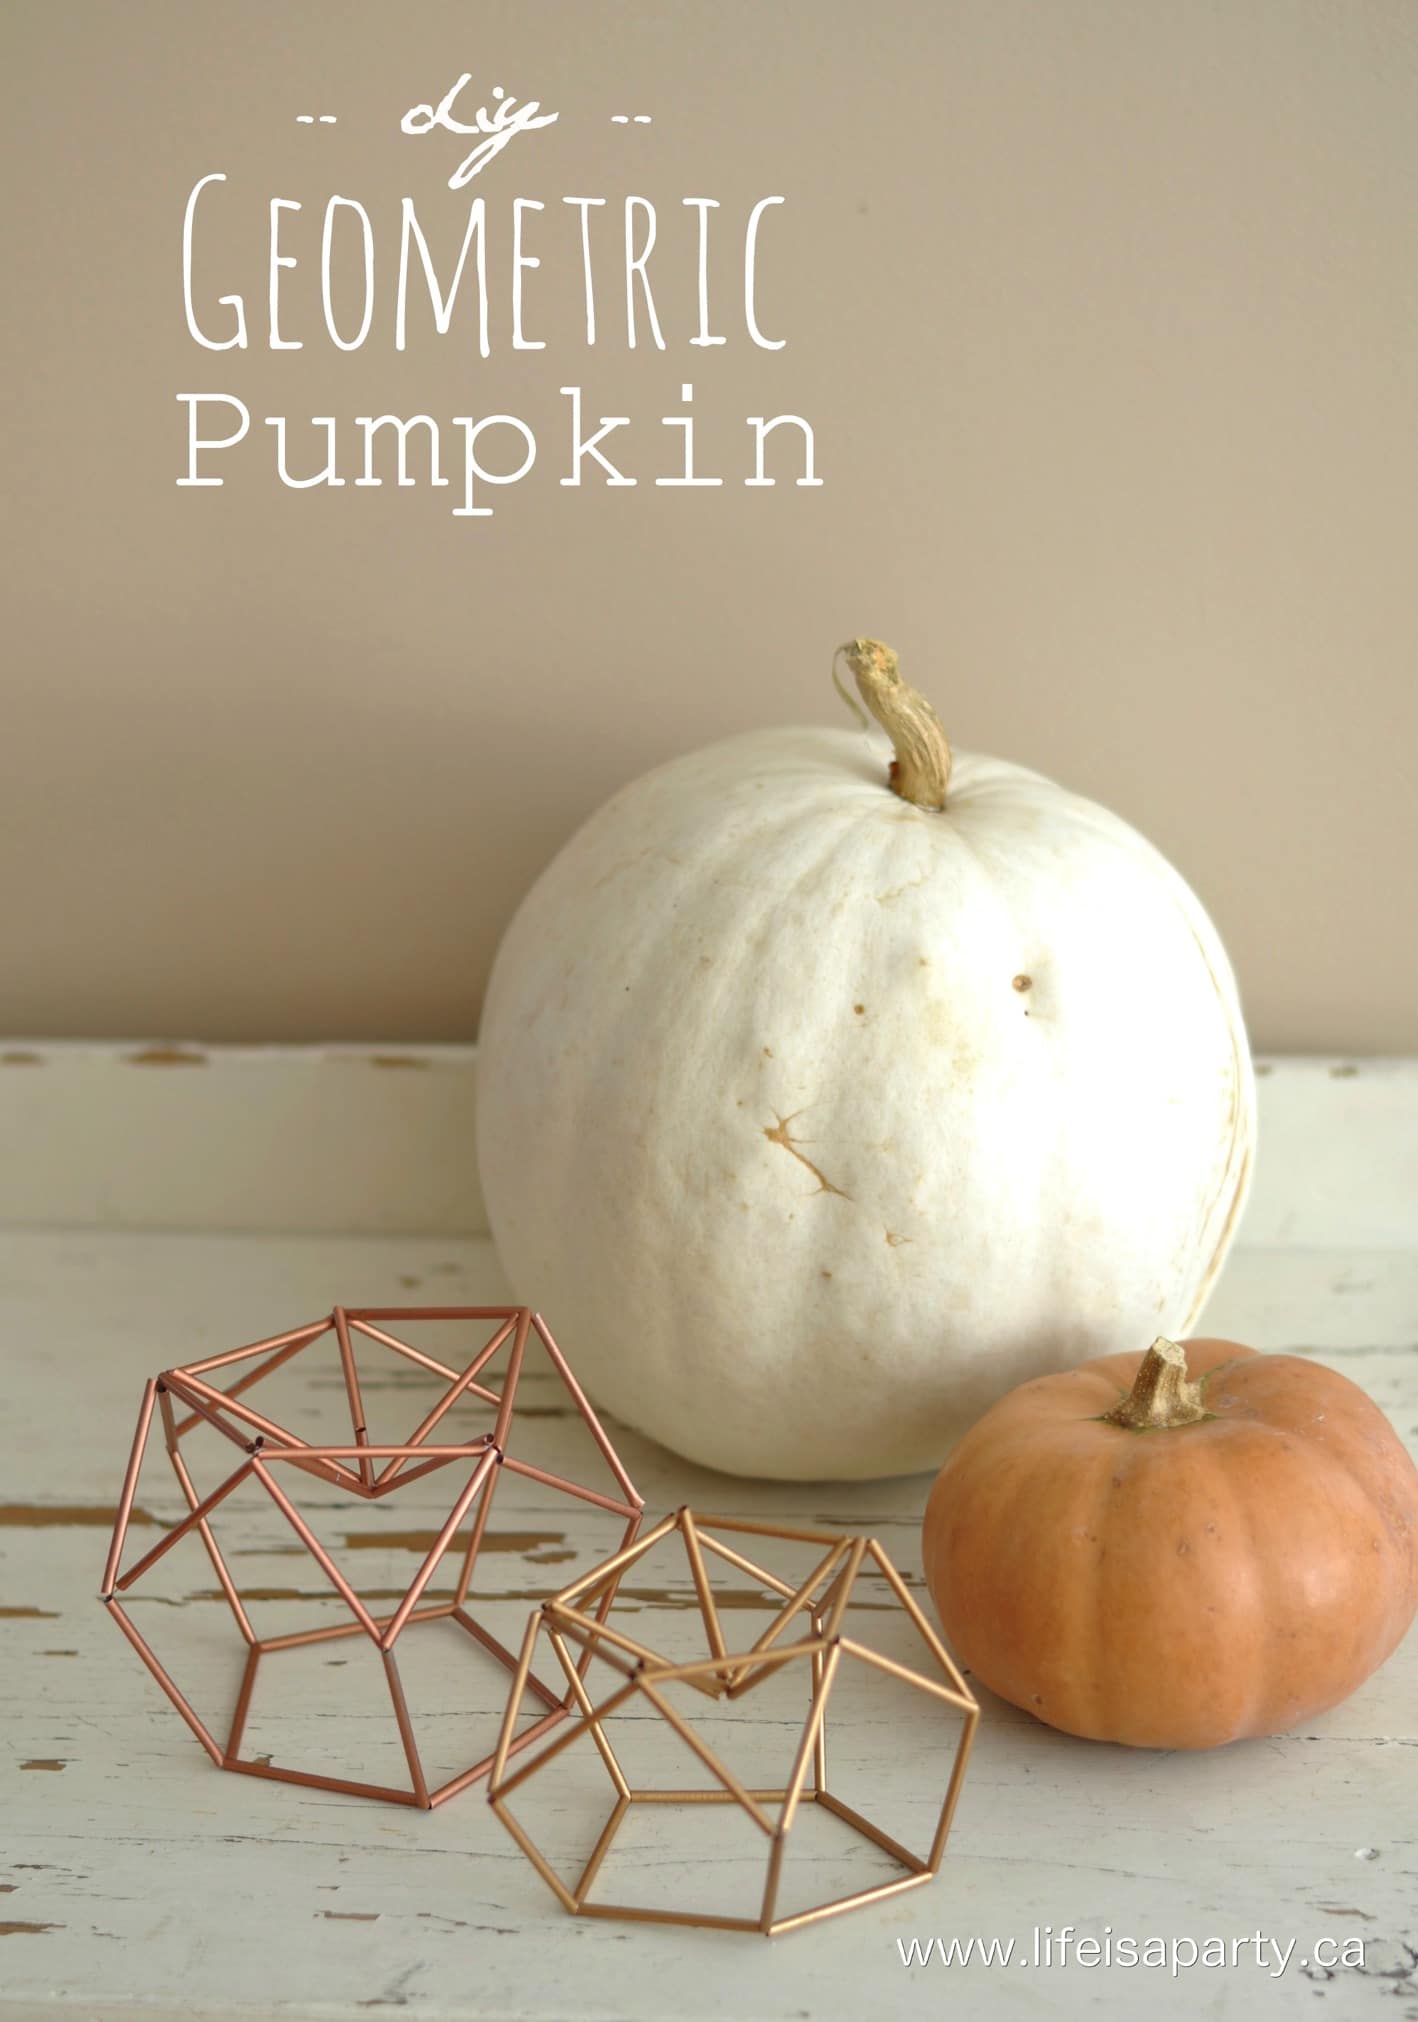 DIY Geometric Himmeli Pumpkin: Easy to follow instructions (with pictures) to make your own geometric pumpkins from spray painted straws.